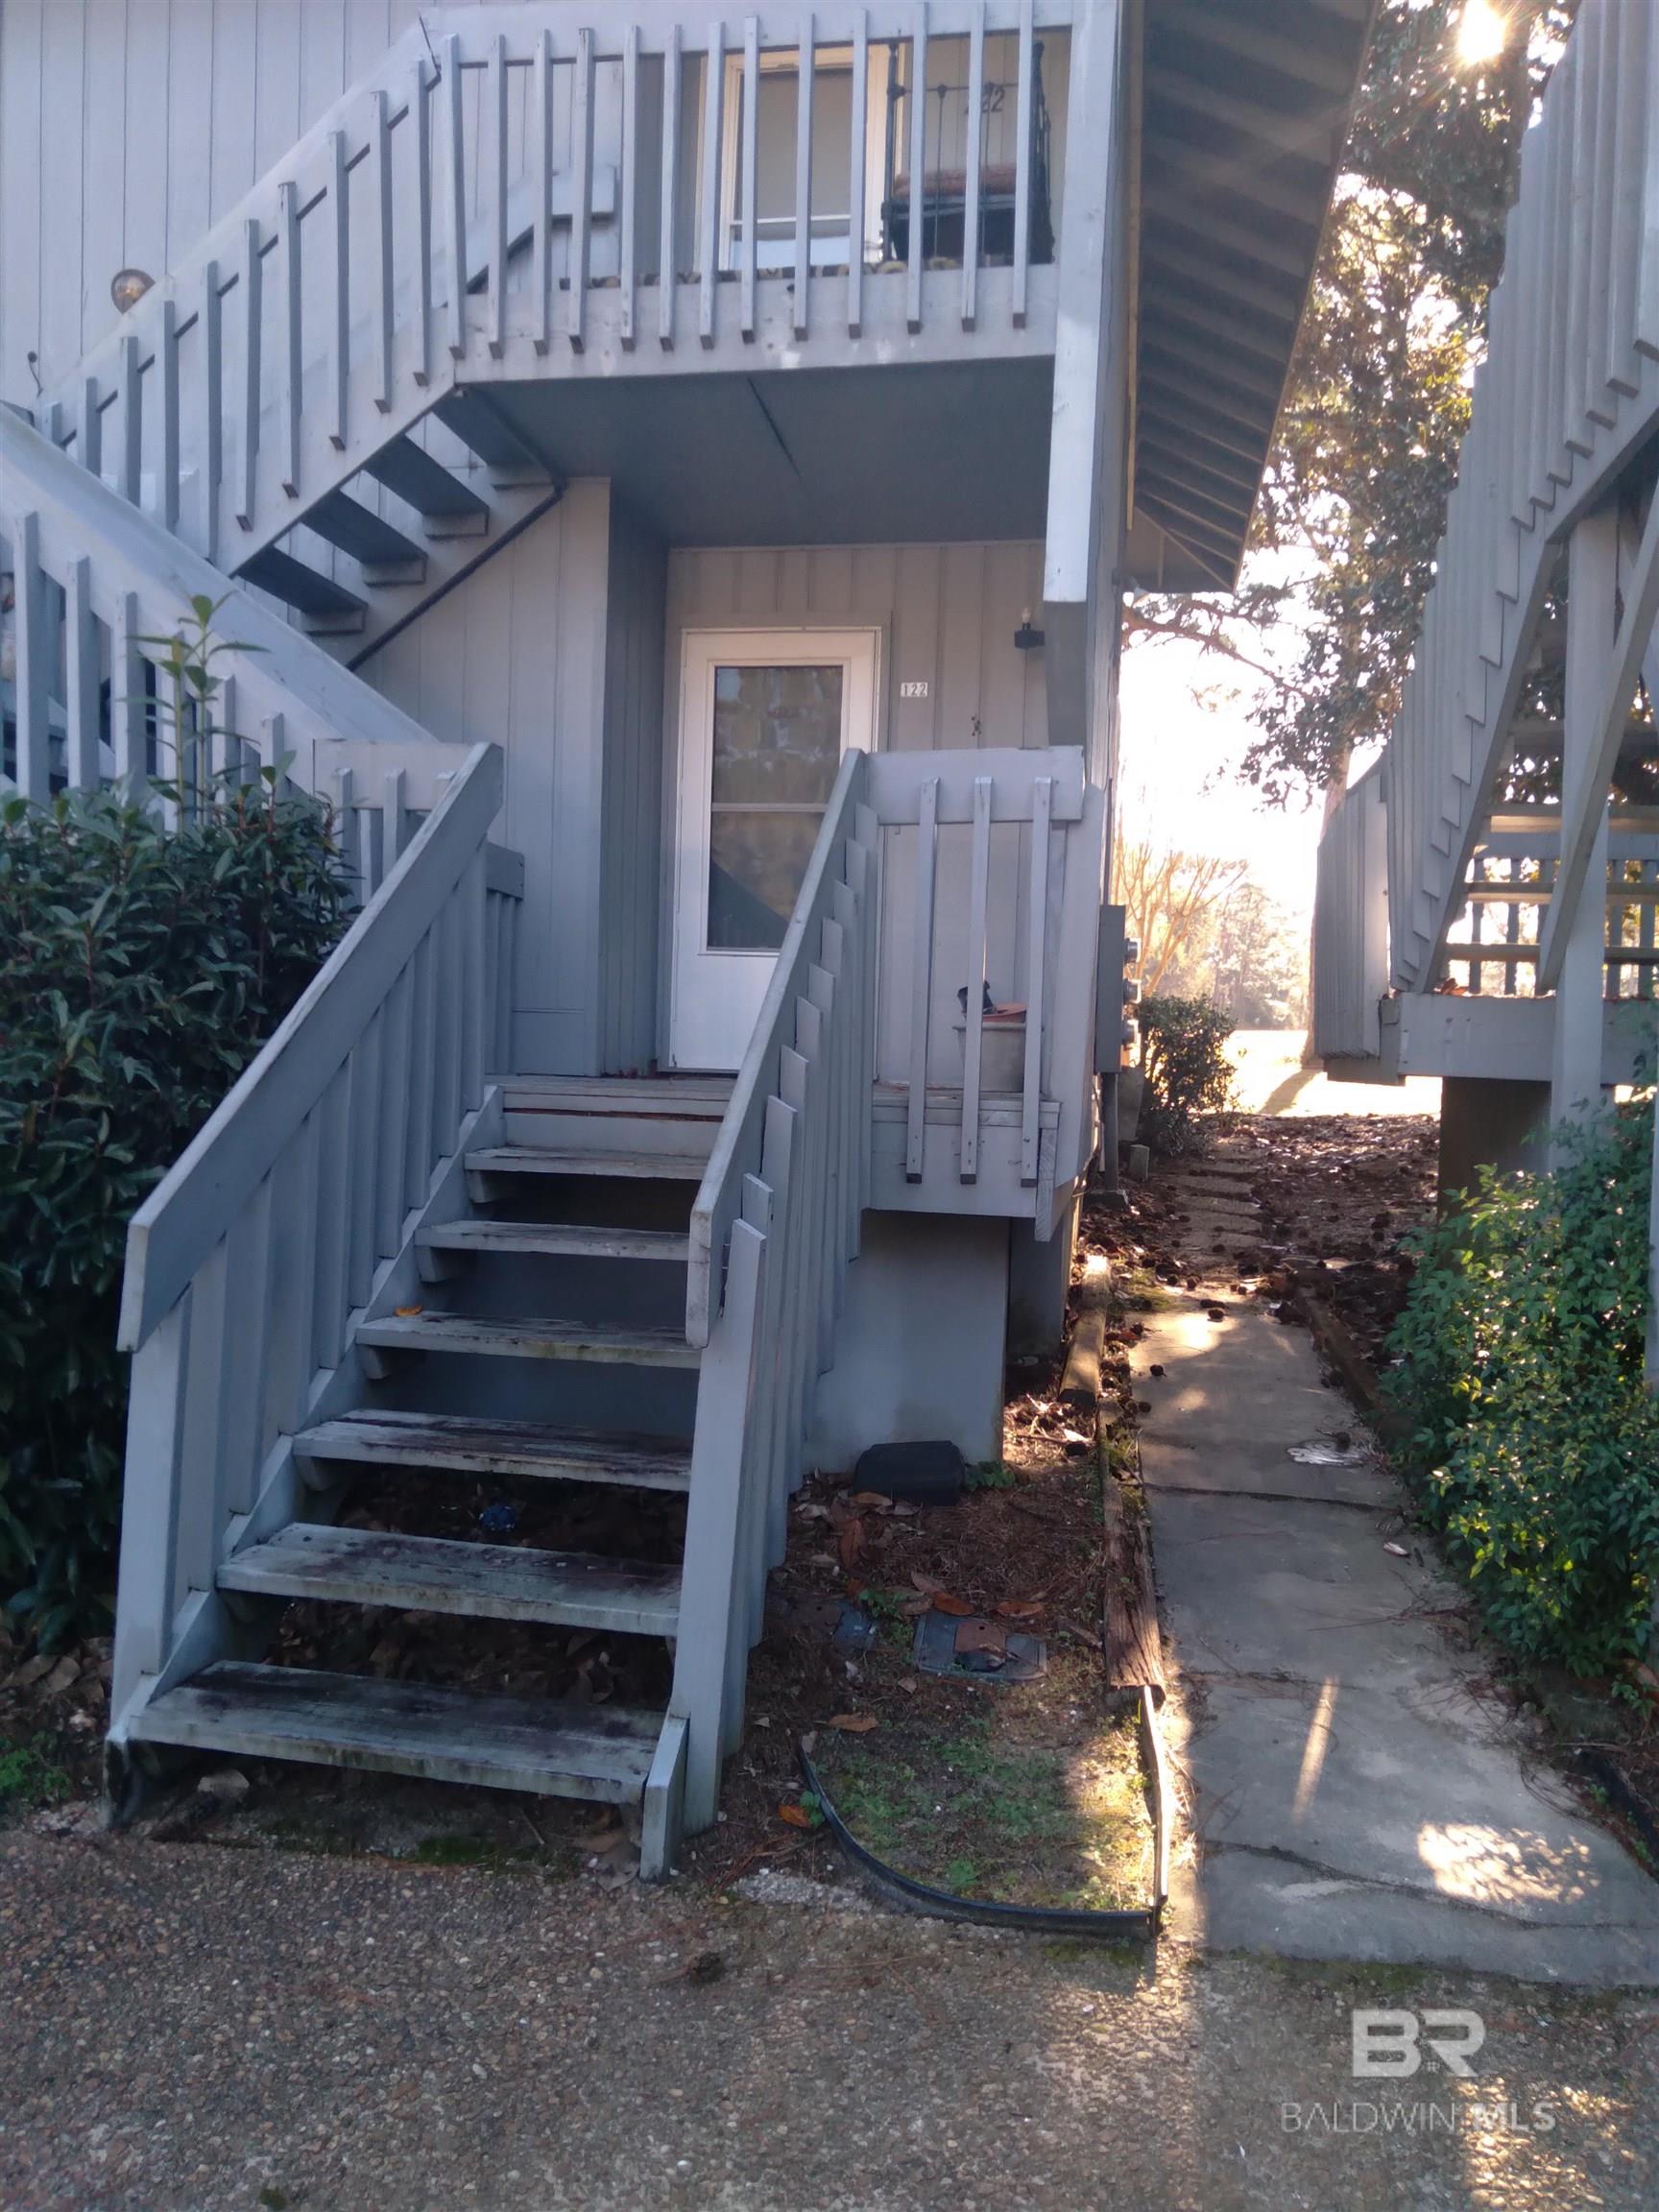 Cute 1 Bedroom 1 Bath  with view of golf course from back porch. Close to I-10, shopping and dining.  Quite corner unit. gREAT Investor opportunity. Investor owned never lived there.   Sold WHERE IS AS IS.